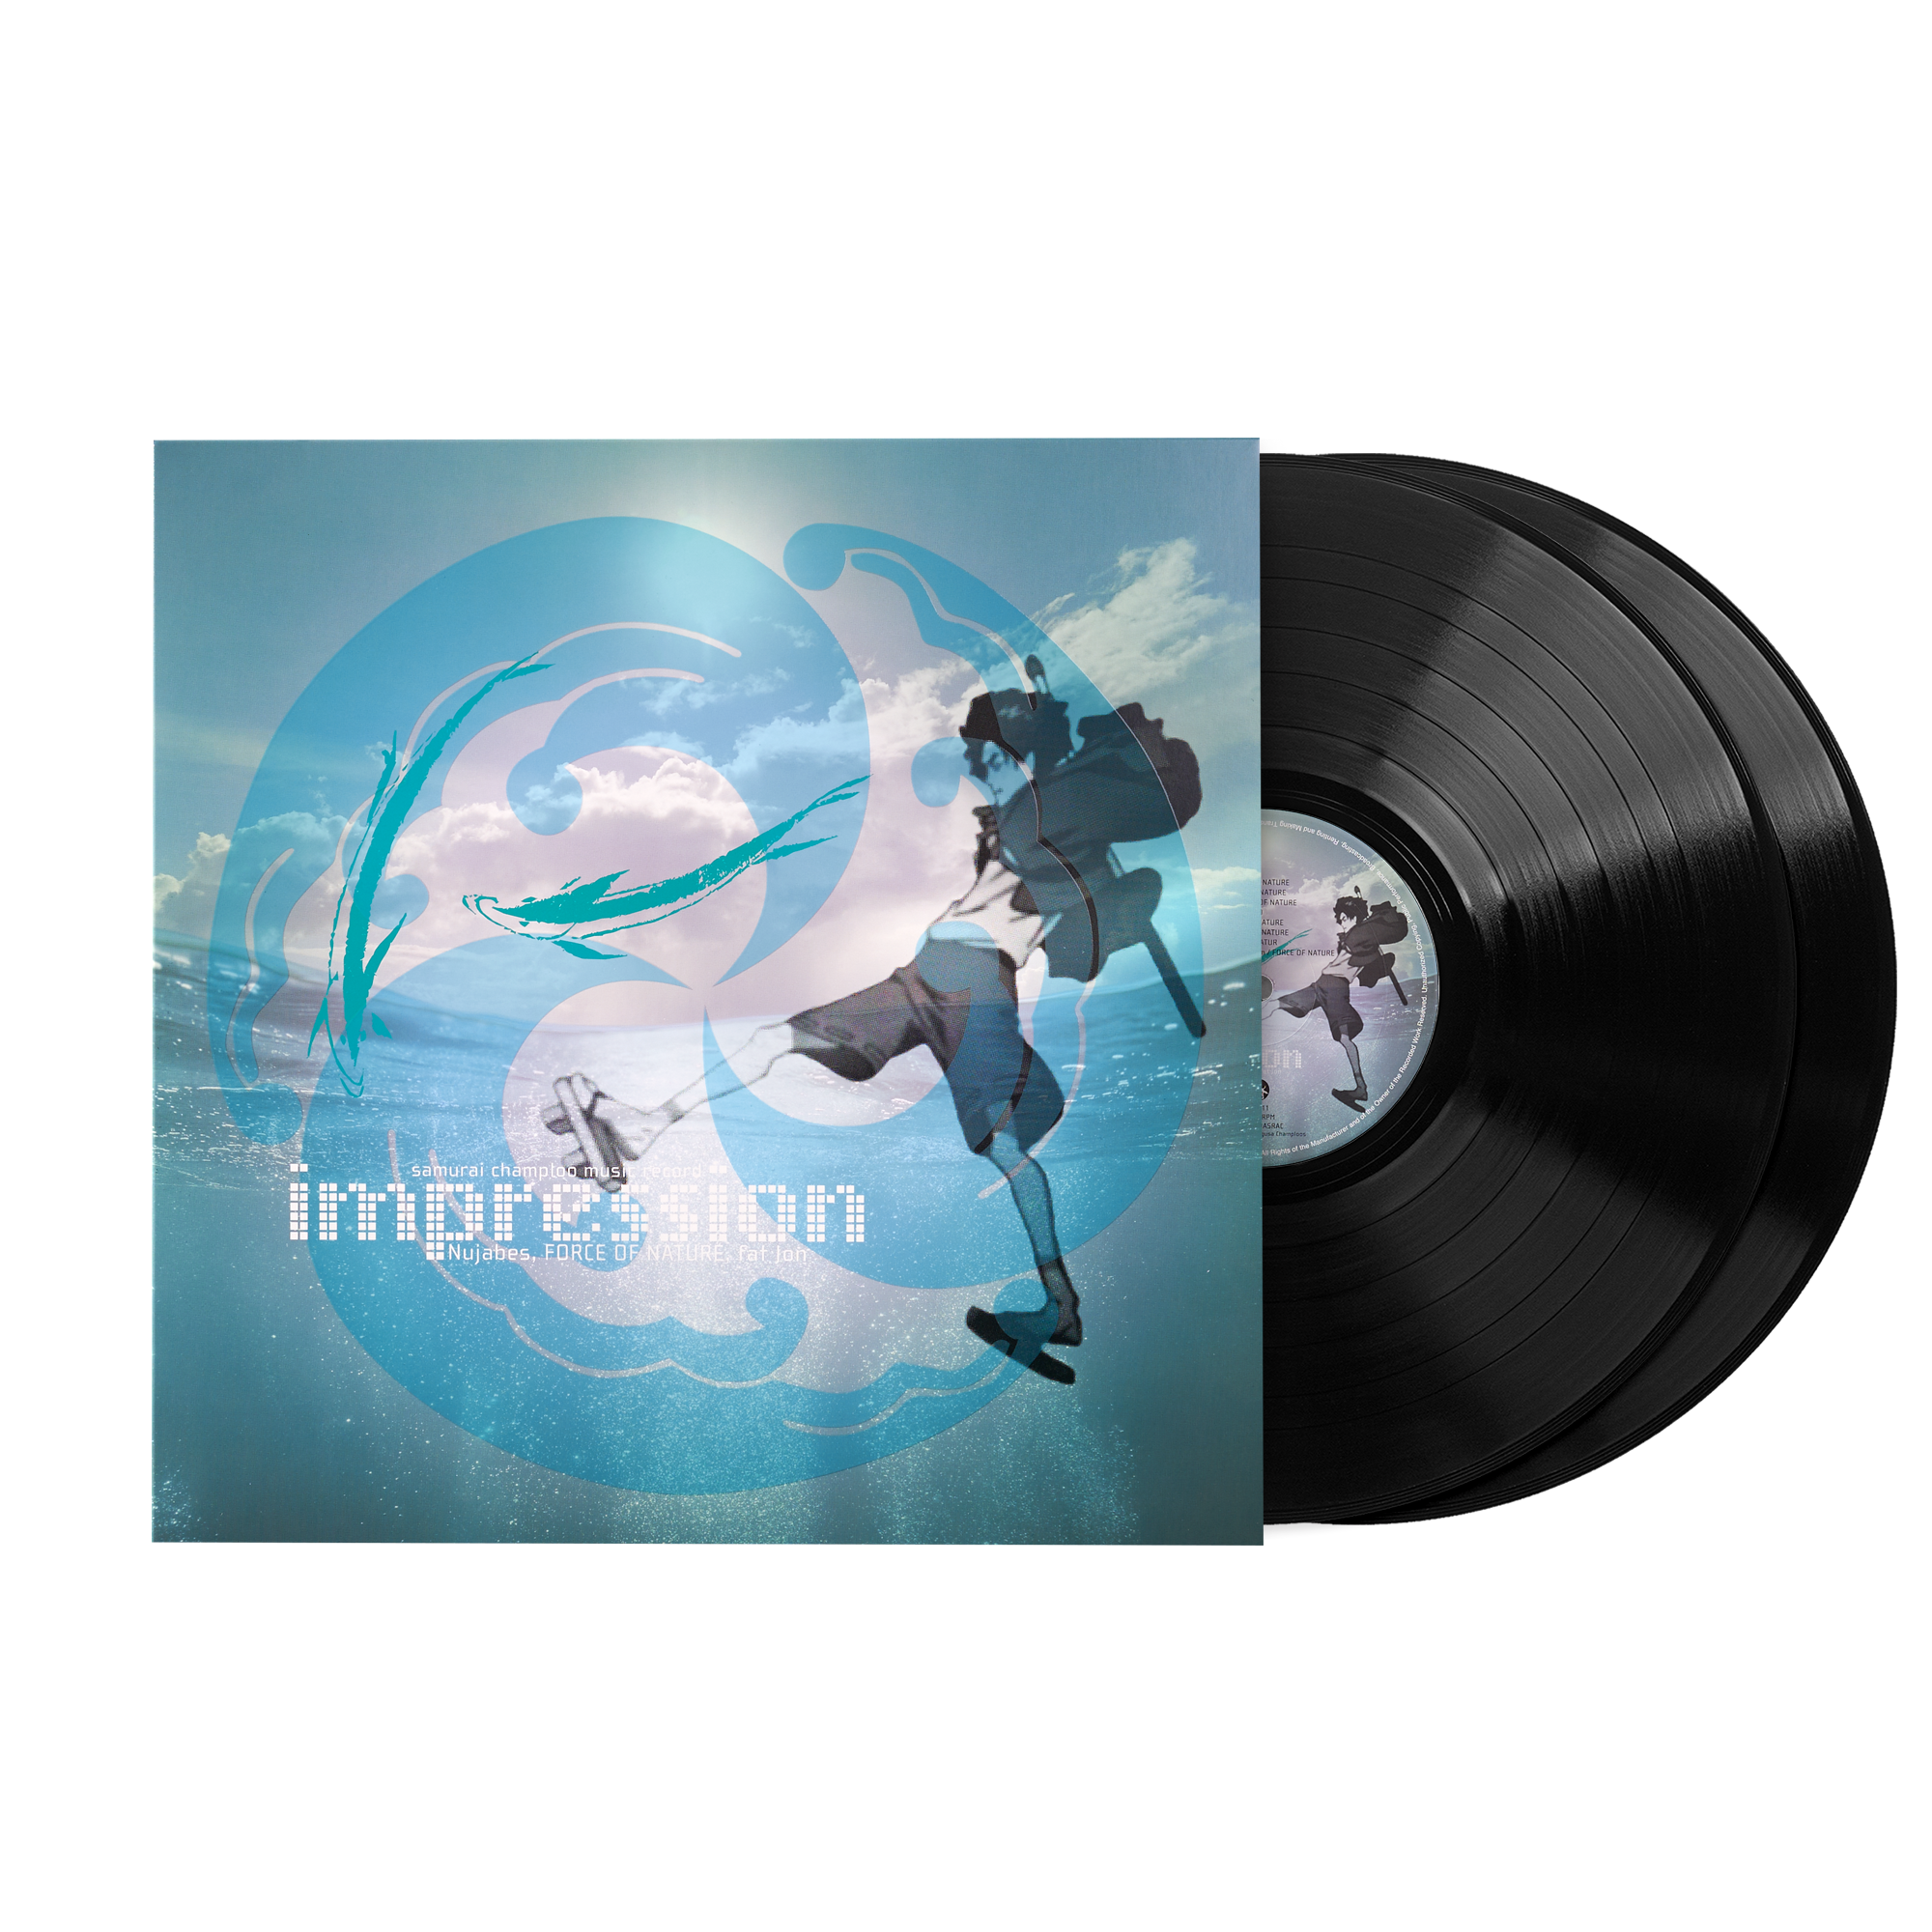 Samurai Champloo Music Record: Impression - Force Of Nature, Nujabes,